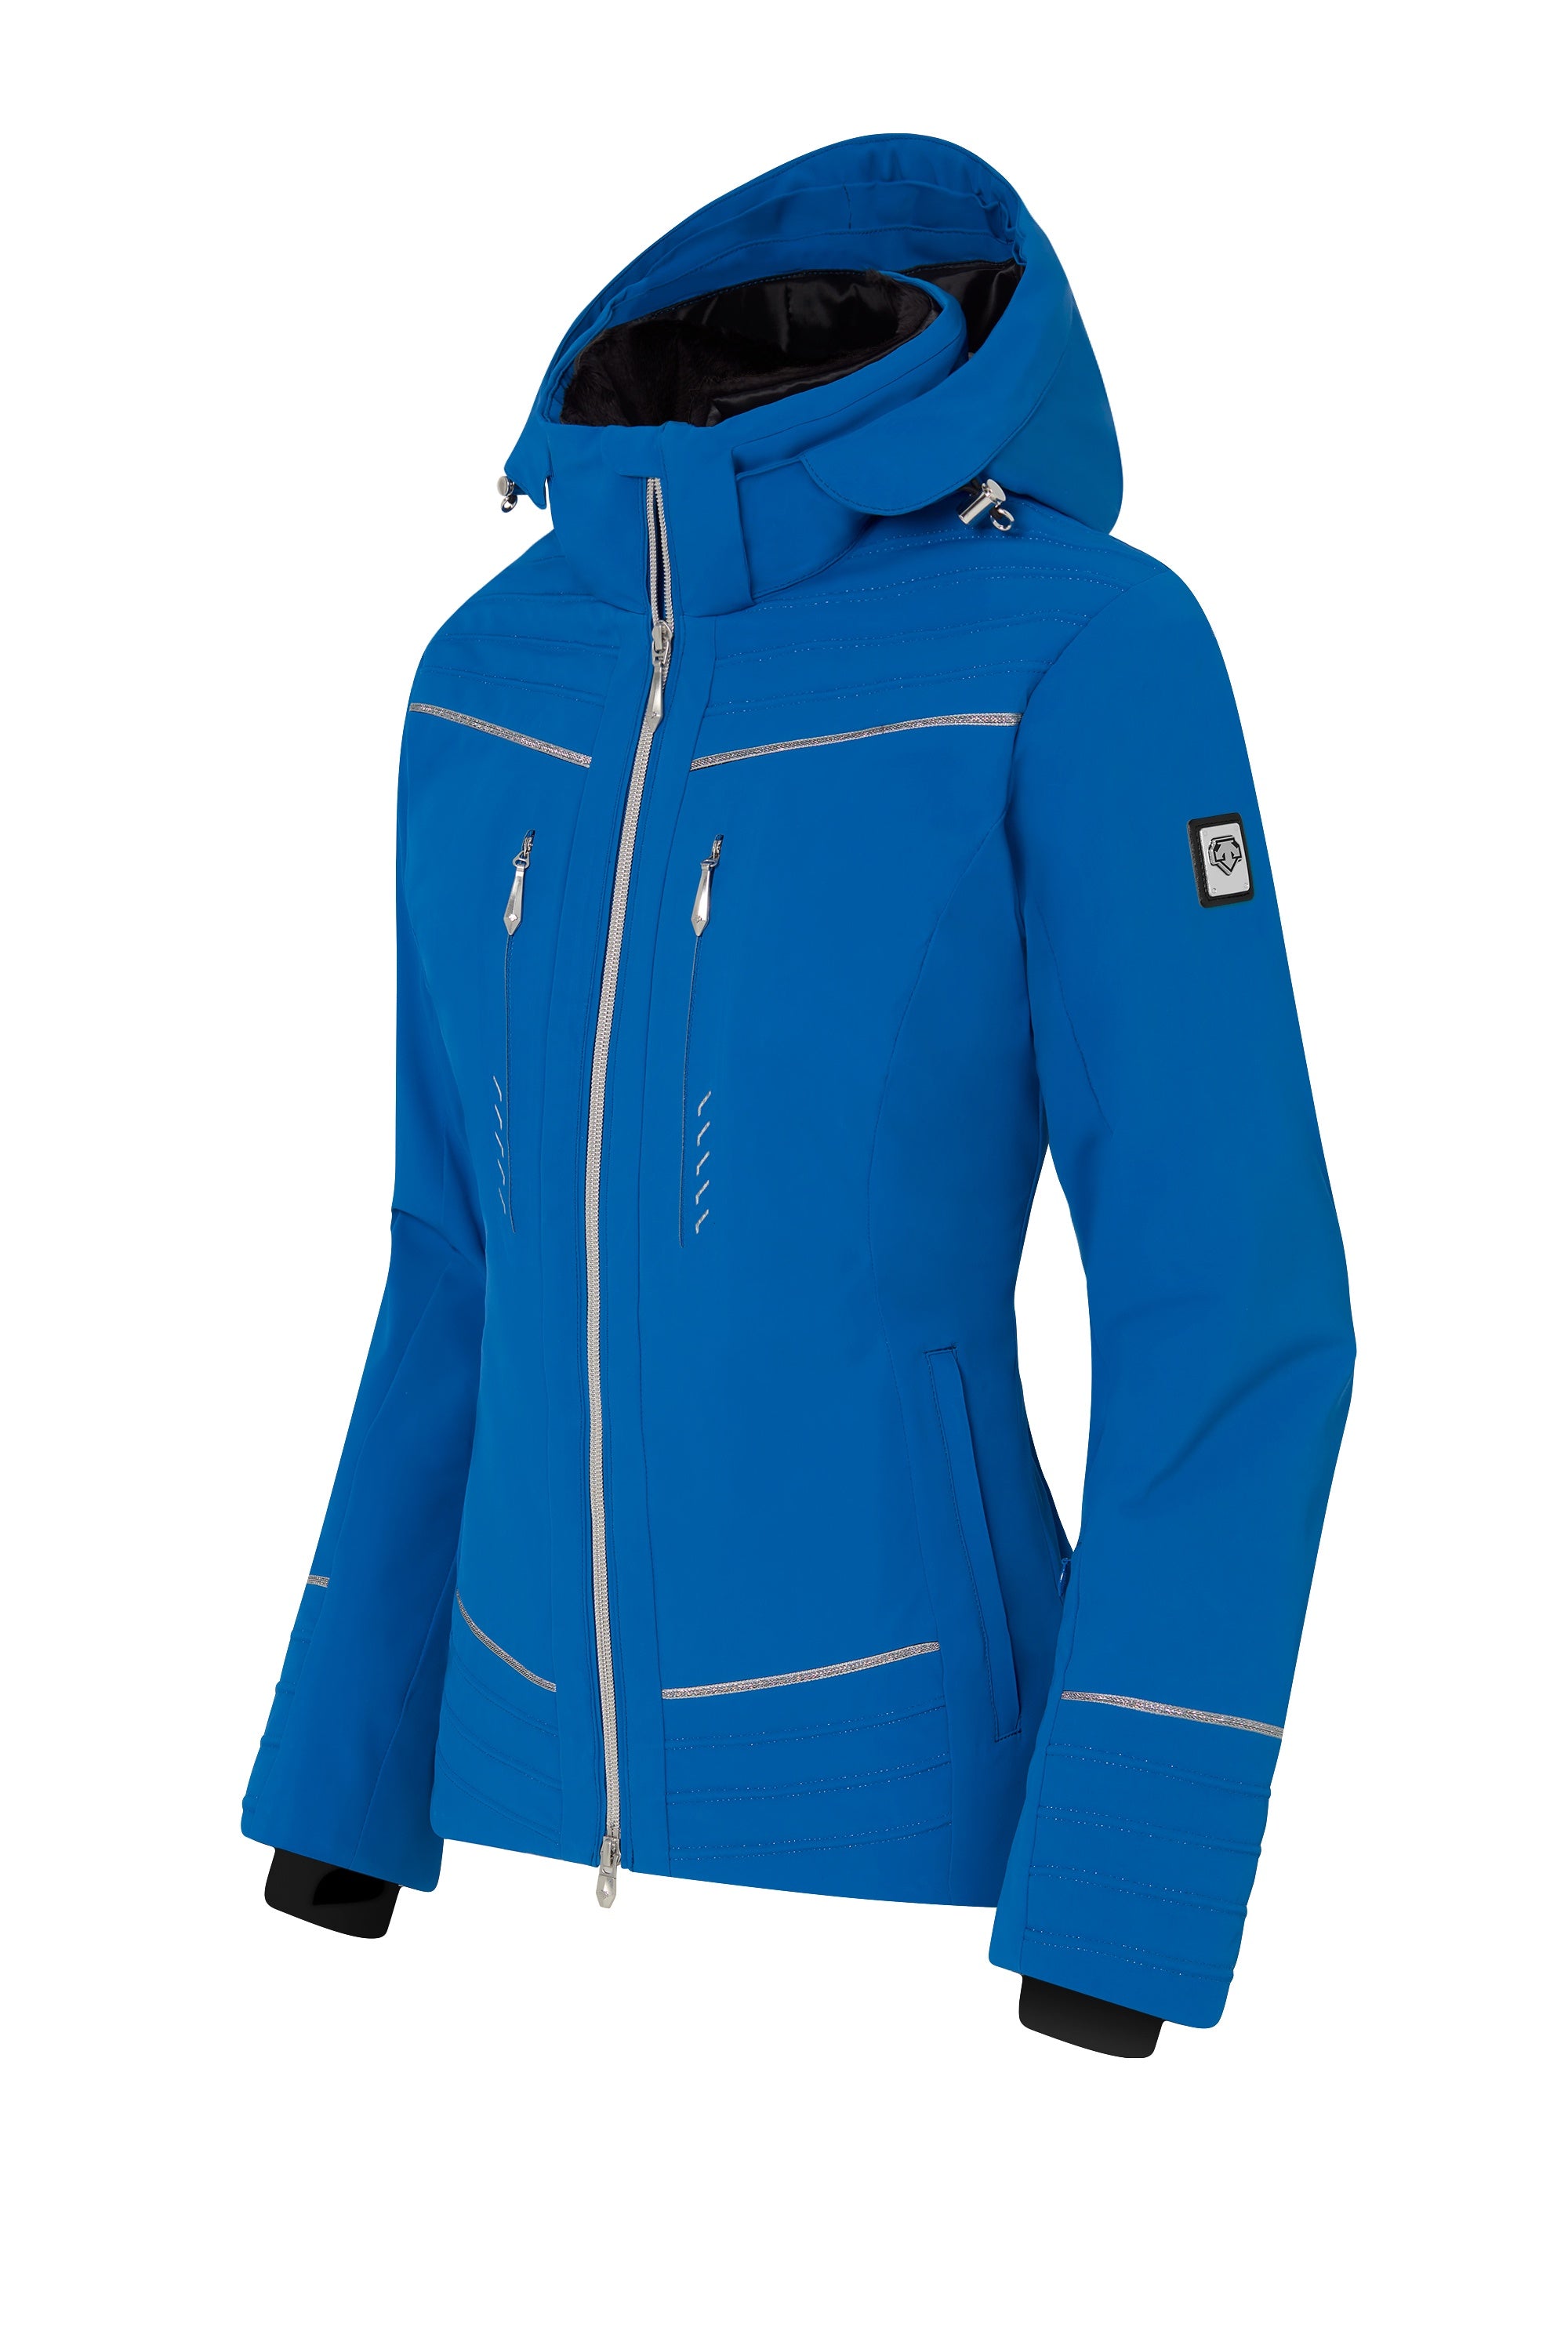 Descente Giana Ladies Jacket (with Fur) 2019 – The Last Lift